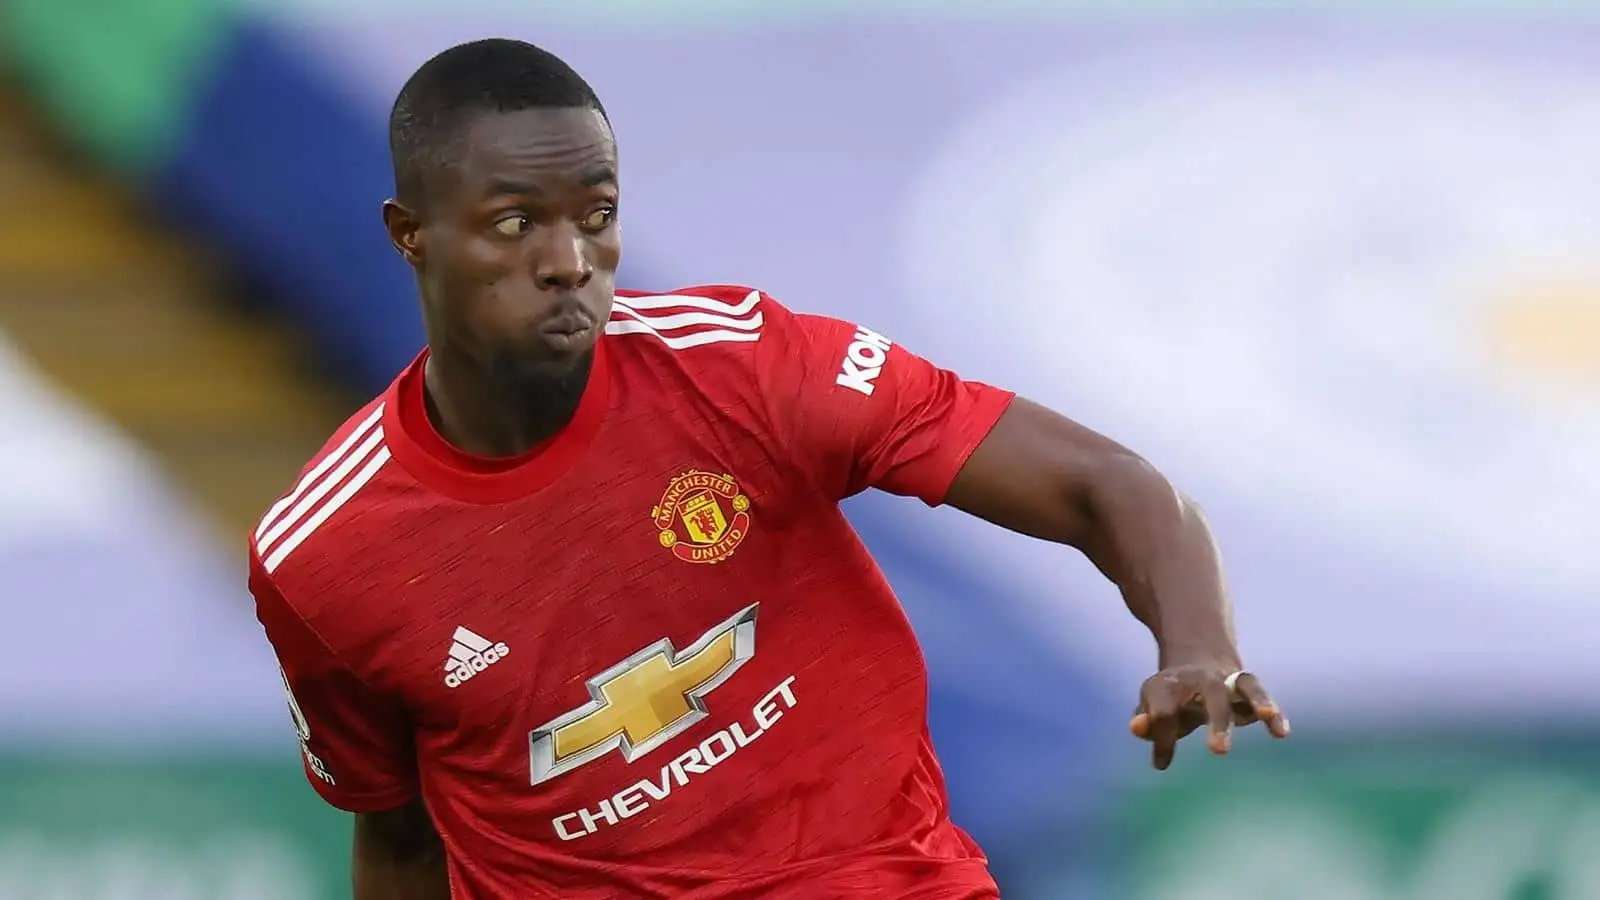 Man Utd receive Premier League offer for Eric Bailly, but familiar foreign contenders lead race for defender